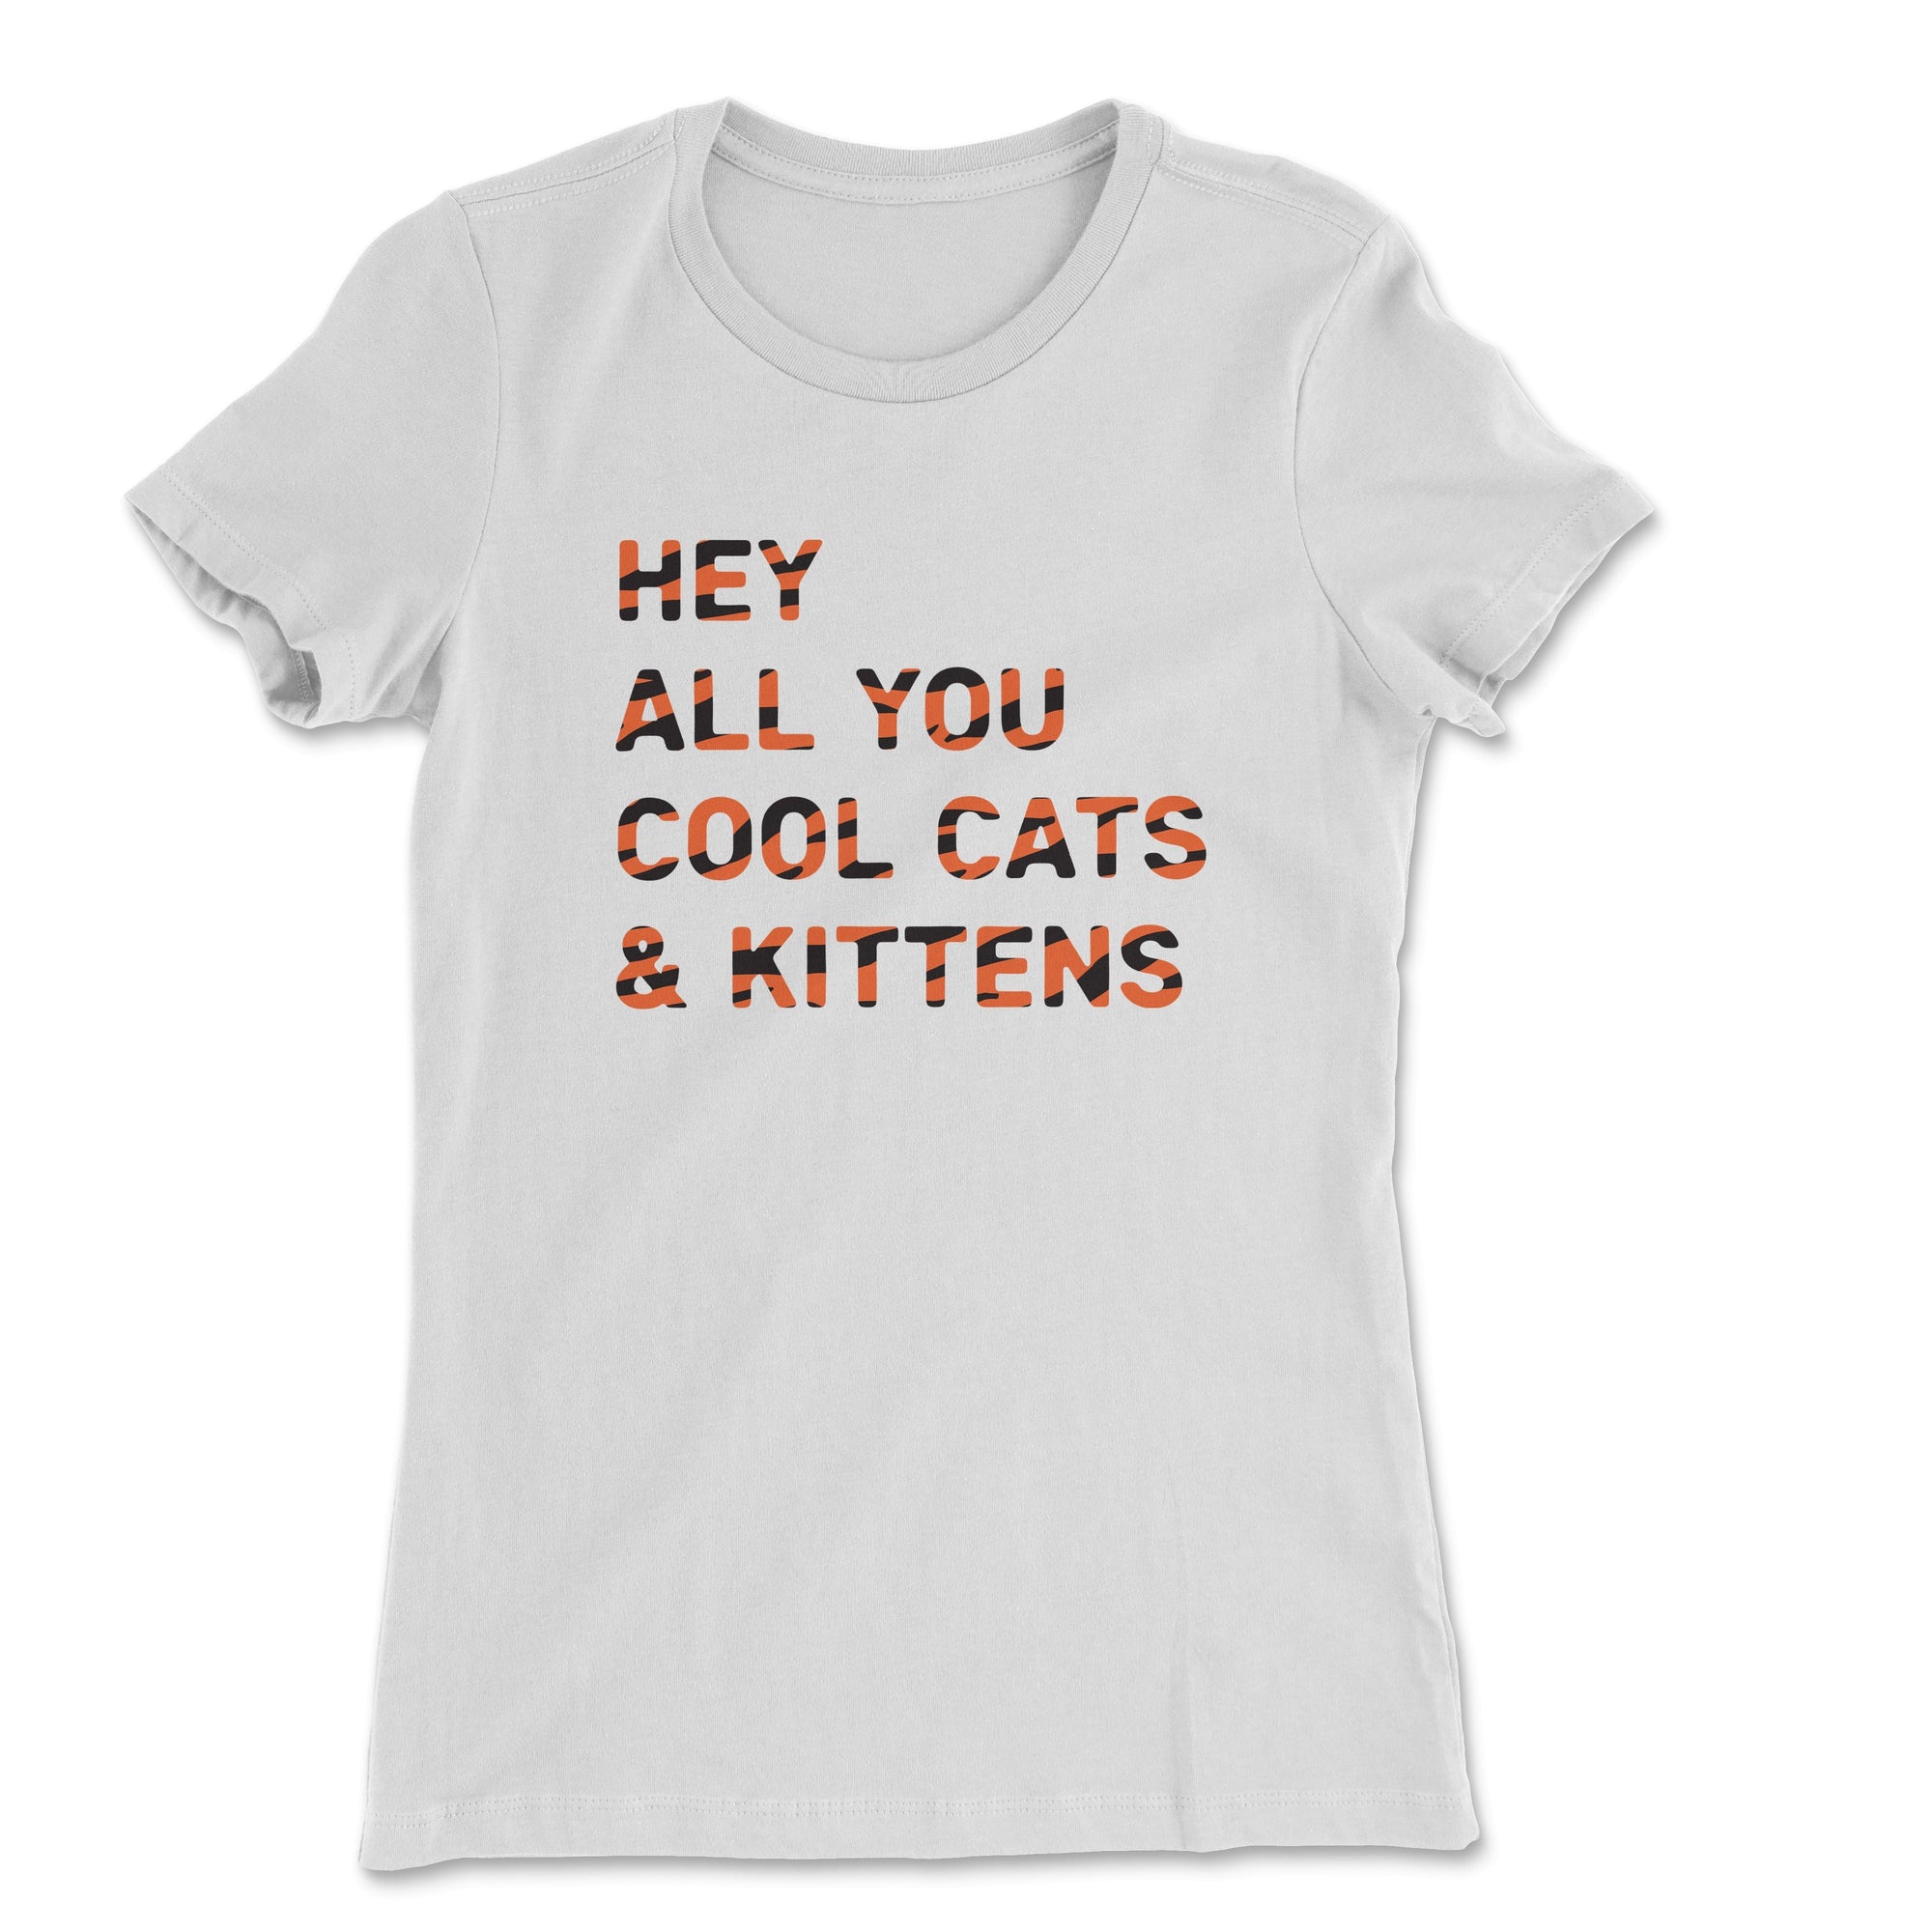 Hey All You Cool Cats And Kittens Women's T-Shirt - anishphilip